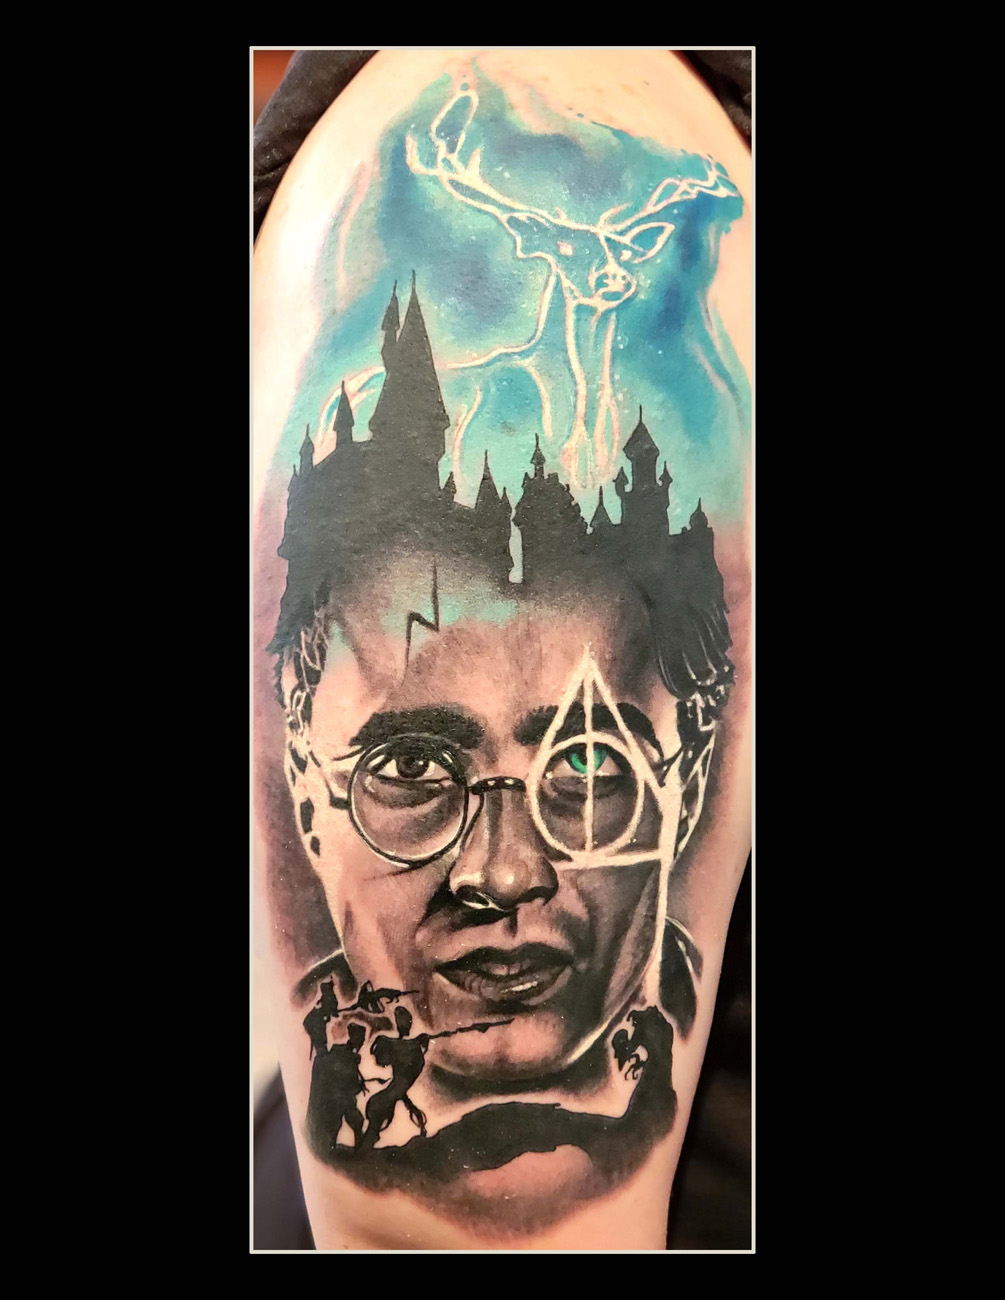 Color, Portrait, Black and Gray, Harry Potter, Realism, Orlando inspired  tattoo by Orlando Tattoo Artist - Jimmy Rogers